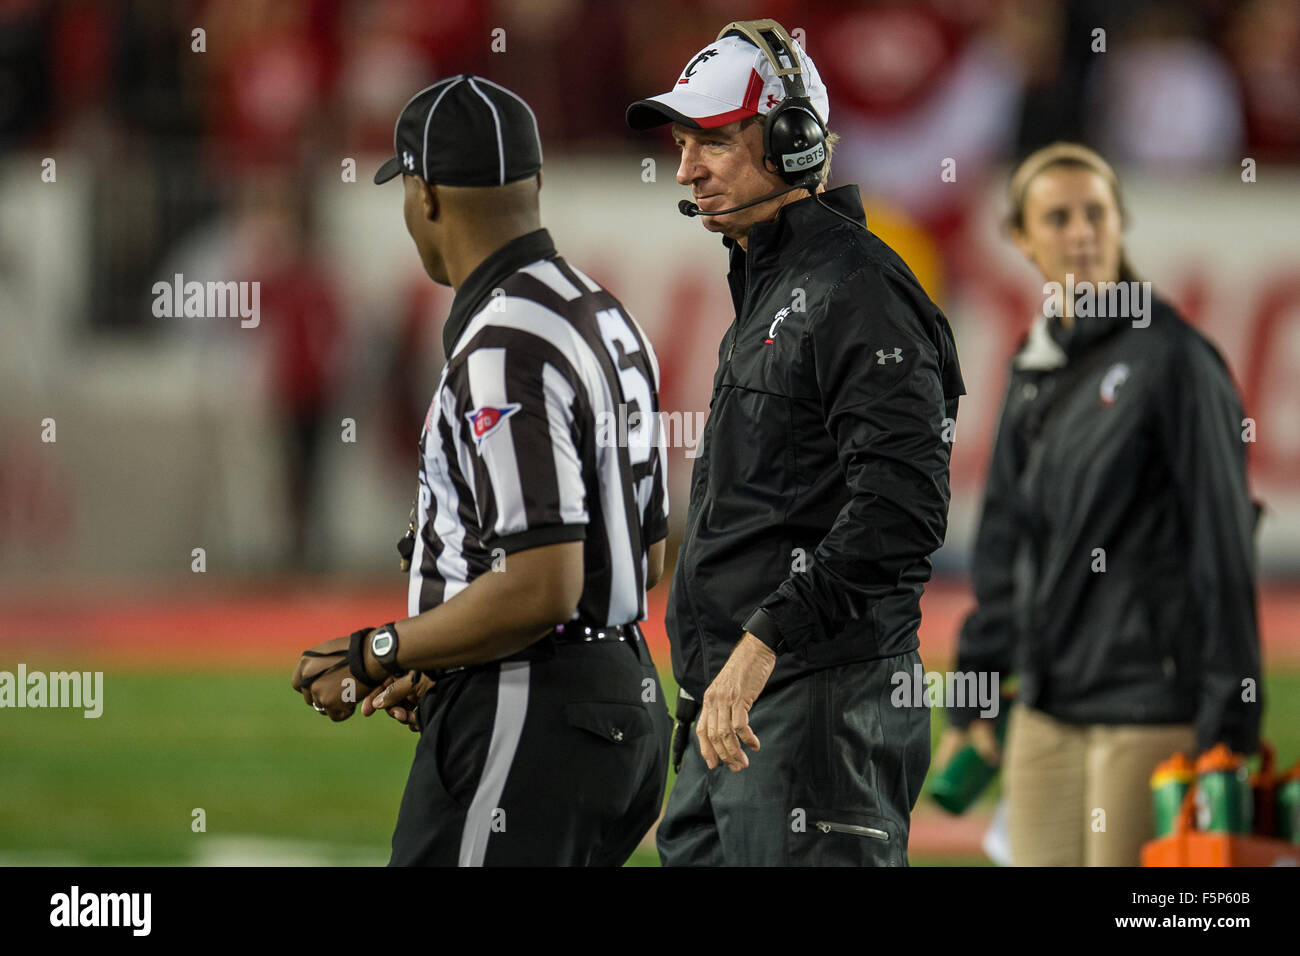 Houston, Texas, USA. 7th Nov, 2015. Cincinnati Bearcats head coach Tommy Tuberville talks to an official during the 4th quarter of an NCAA football game between the Cincinnati Bearcats and the University of Houston Cougars at TDECU Stadium in Houston, TX.Trask Smith/CSM/Alamy Live News Stock Photo